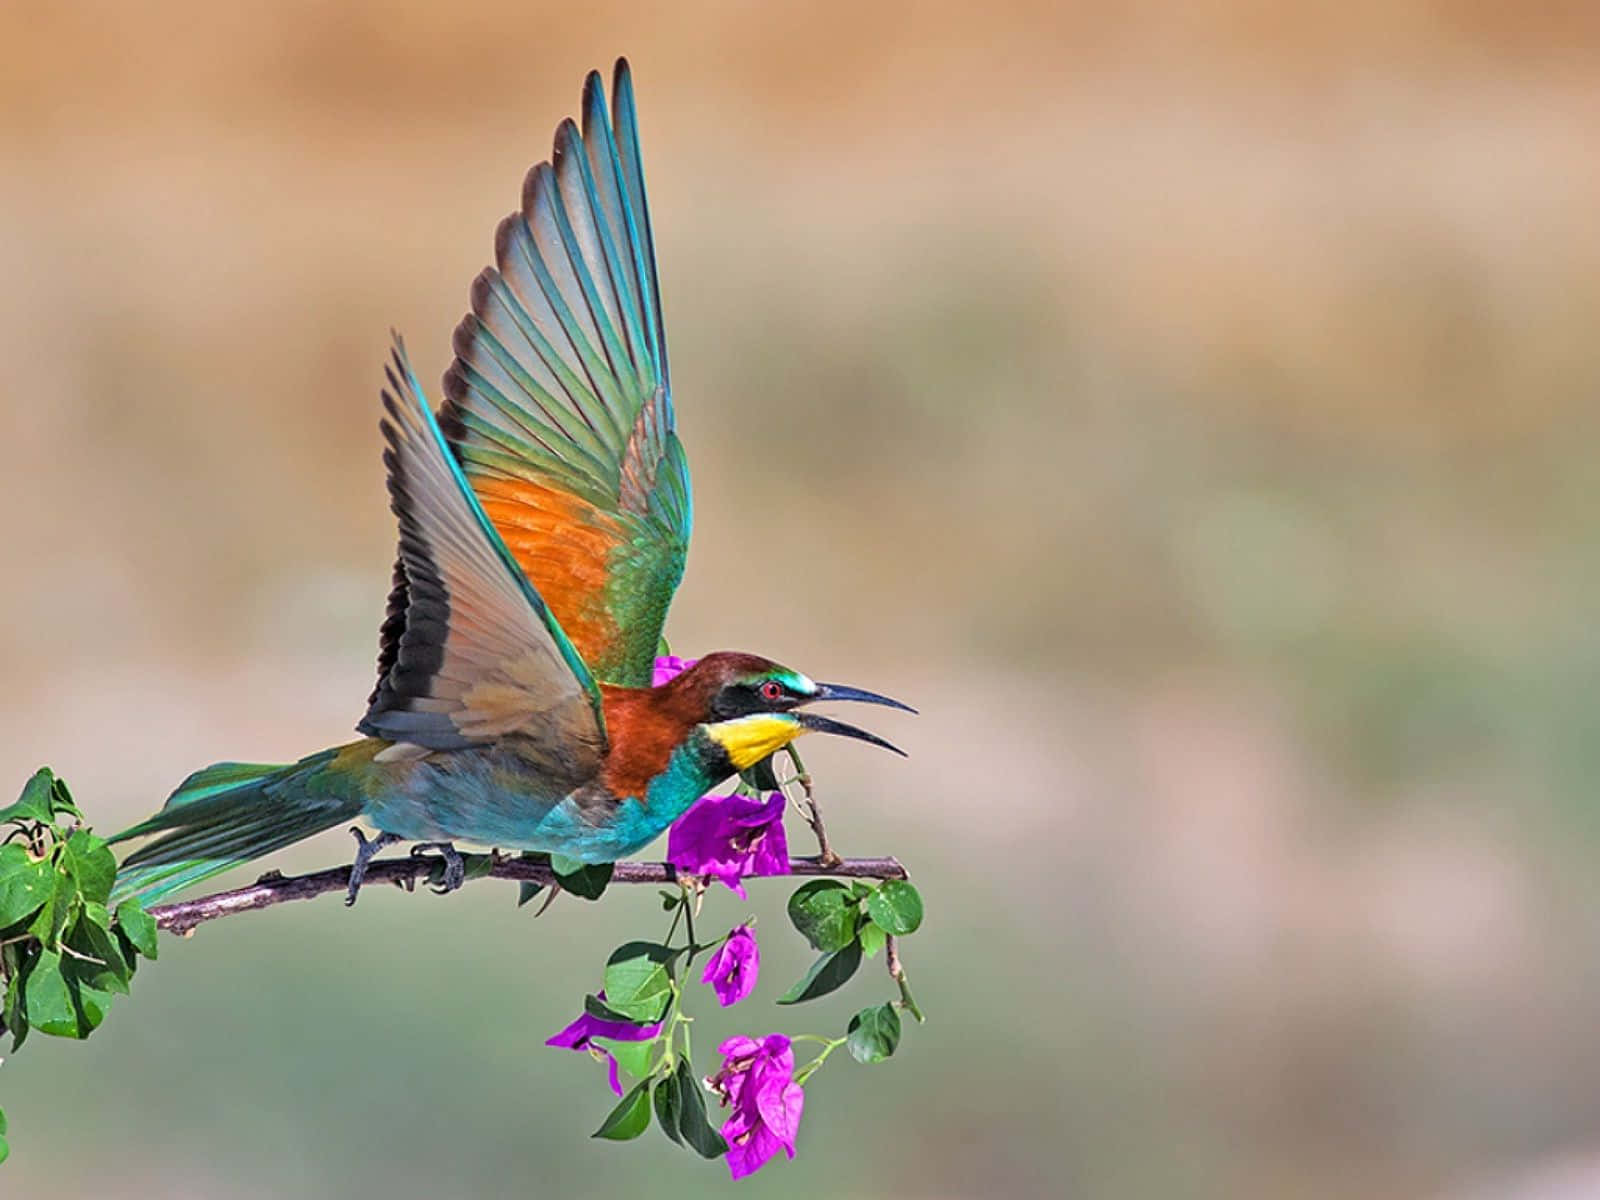 A Colorful Bird Is Flying Over A Flower